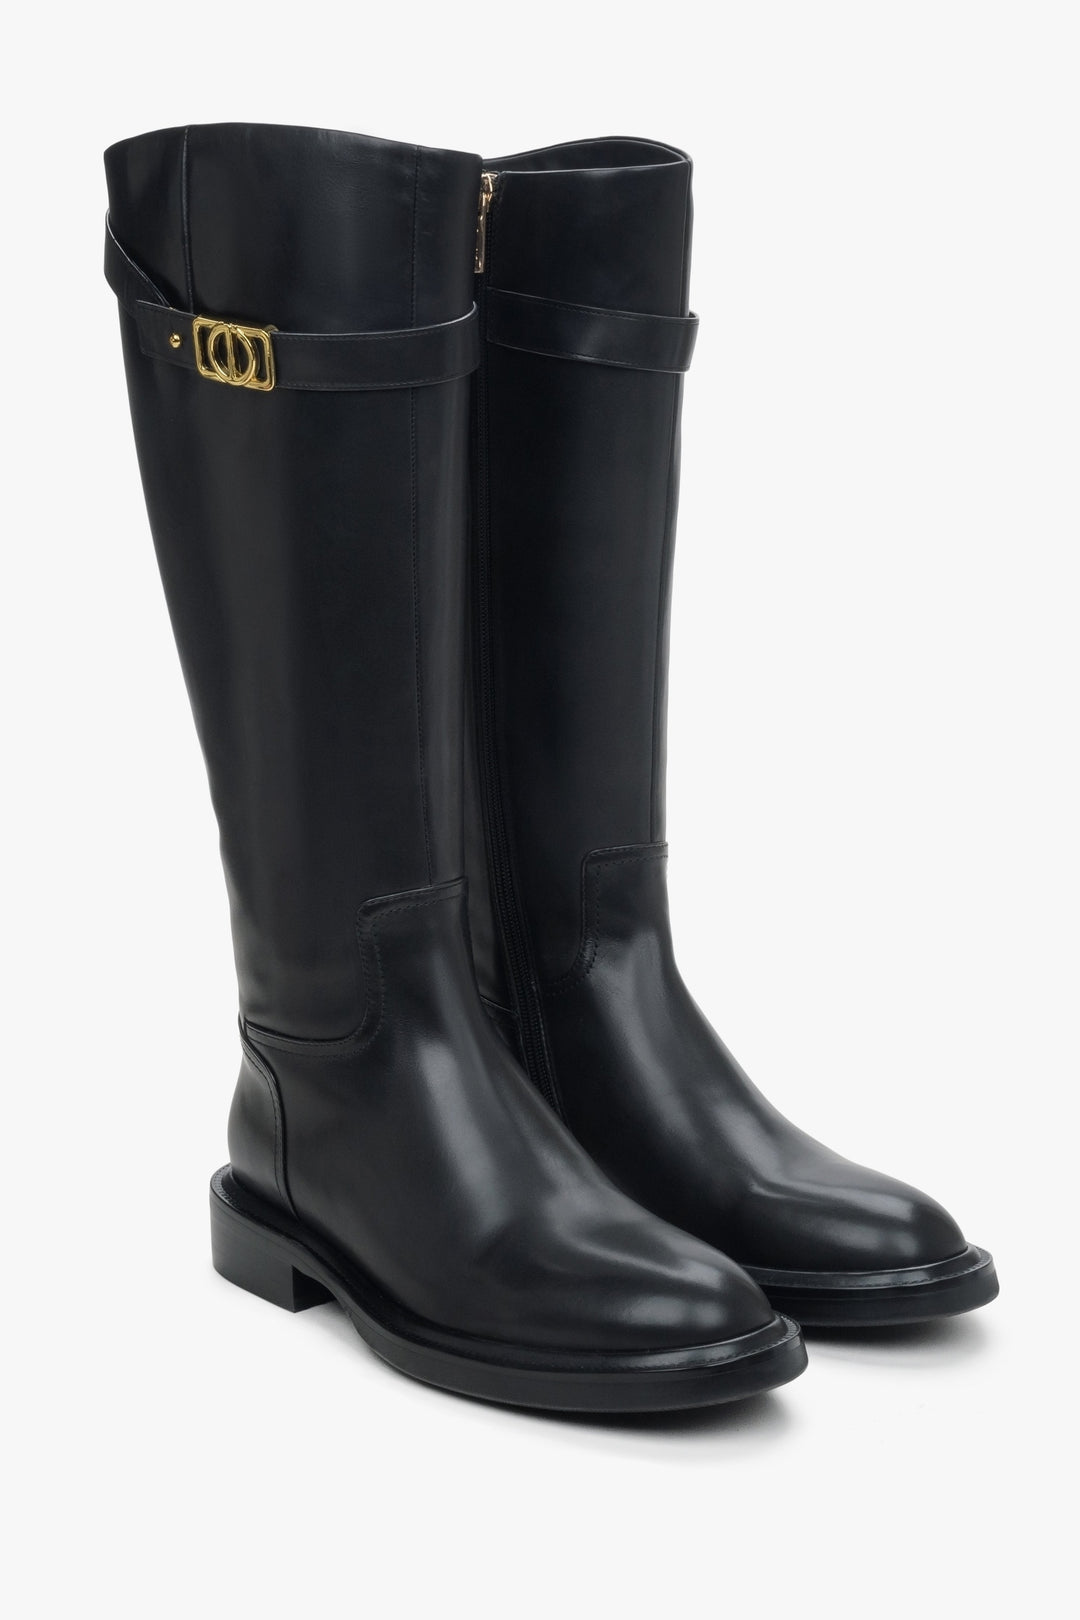 Women's black leather boots with a decorative strap.